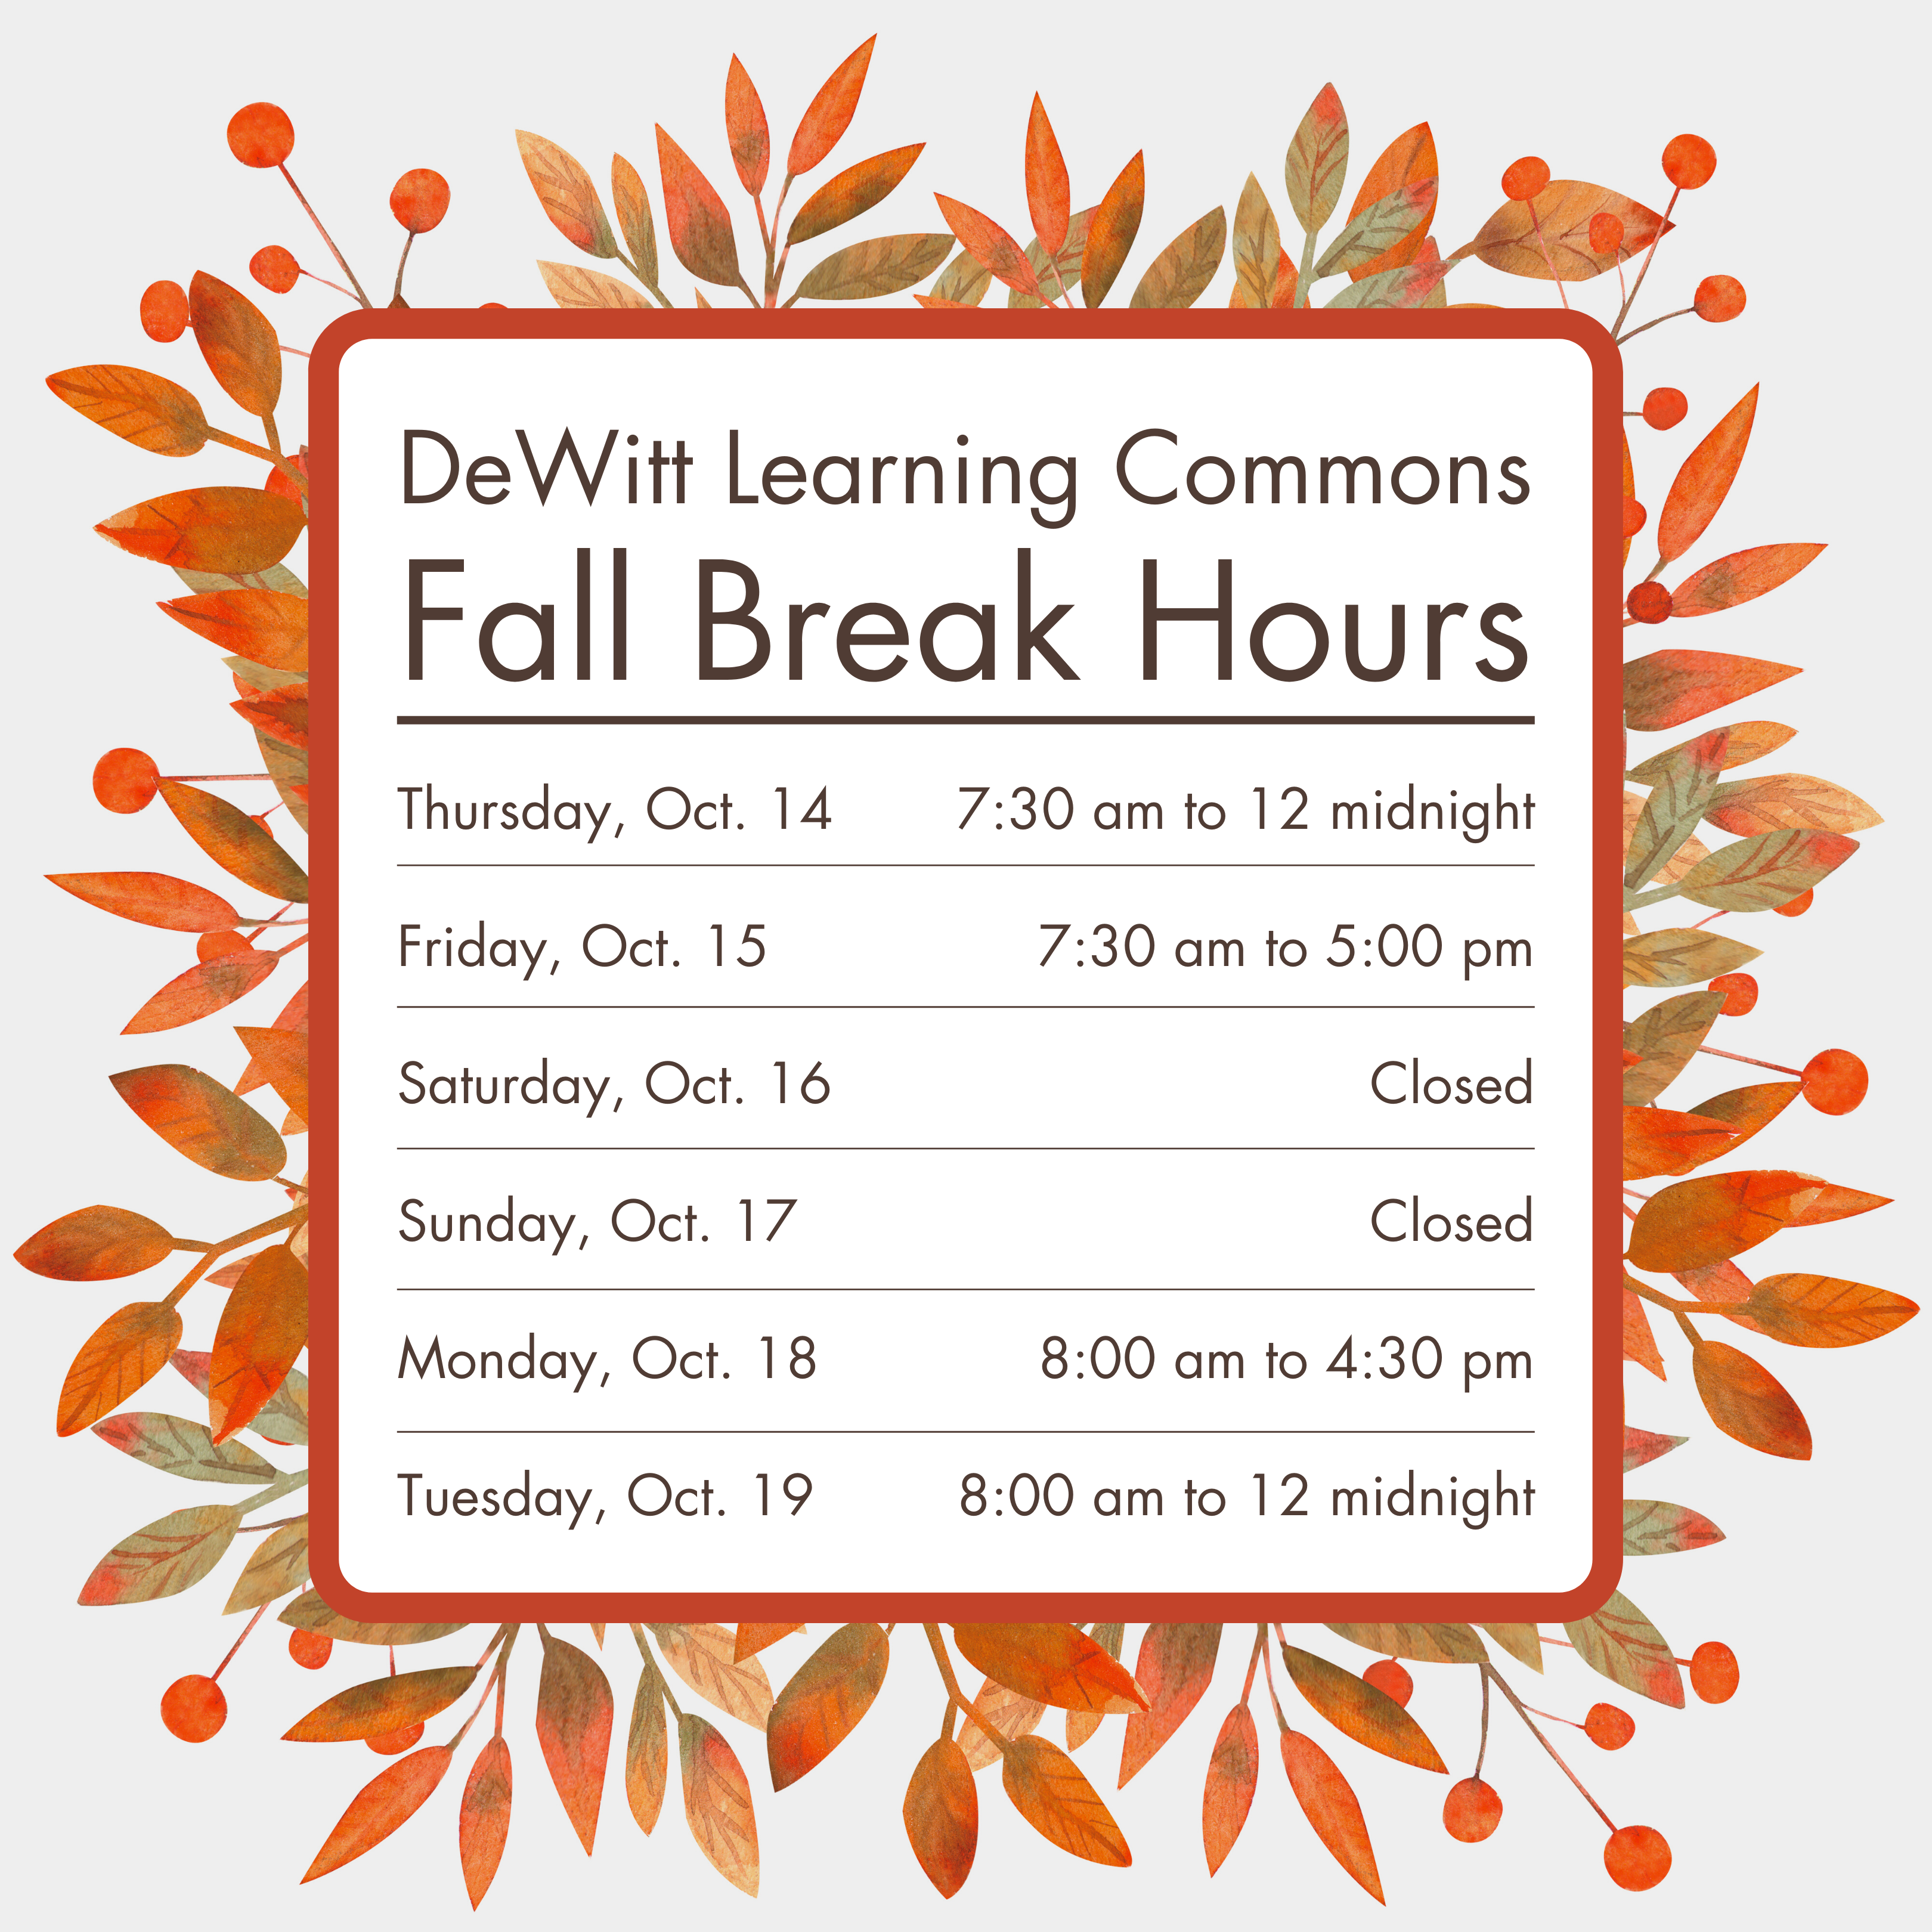 Please note our hours over Fall Break. Thursday, Oct. 14 - 7:30 am to 12 midnight; Friday, Oct. 15 - 7:30 am to 5 pm; Saturday, Oct. 16 - Closed;  Sunday, Oct. 17 - Closed; Monday, Oct. 18 - 8 am to 4:30 pm; Tuesday, Oct. 19 - 8 am to 12 midnight.